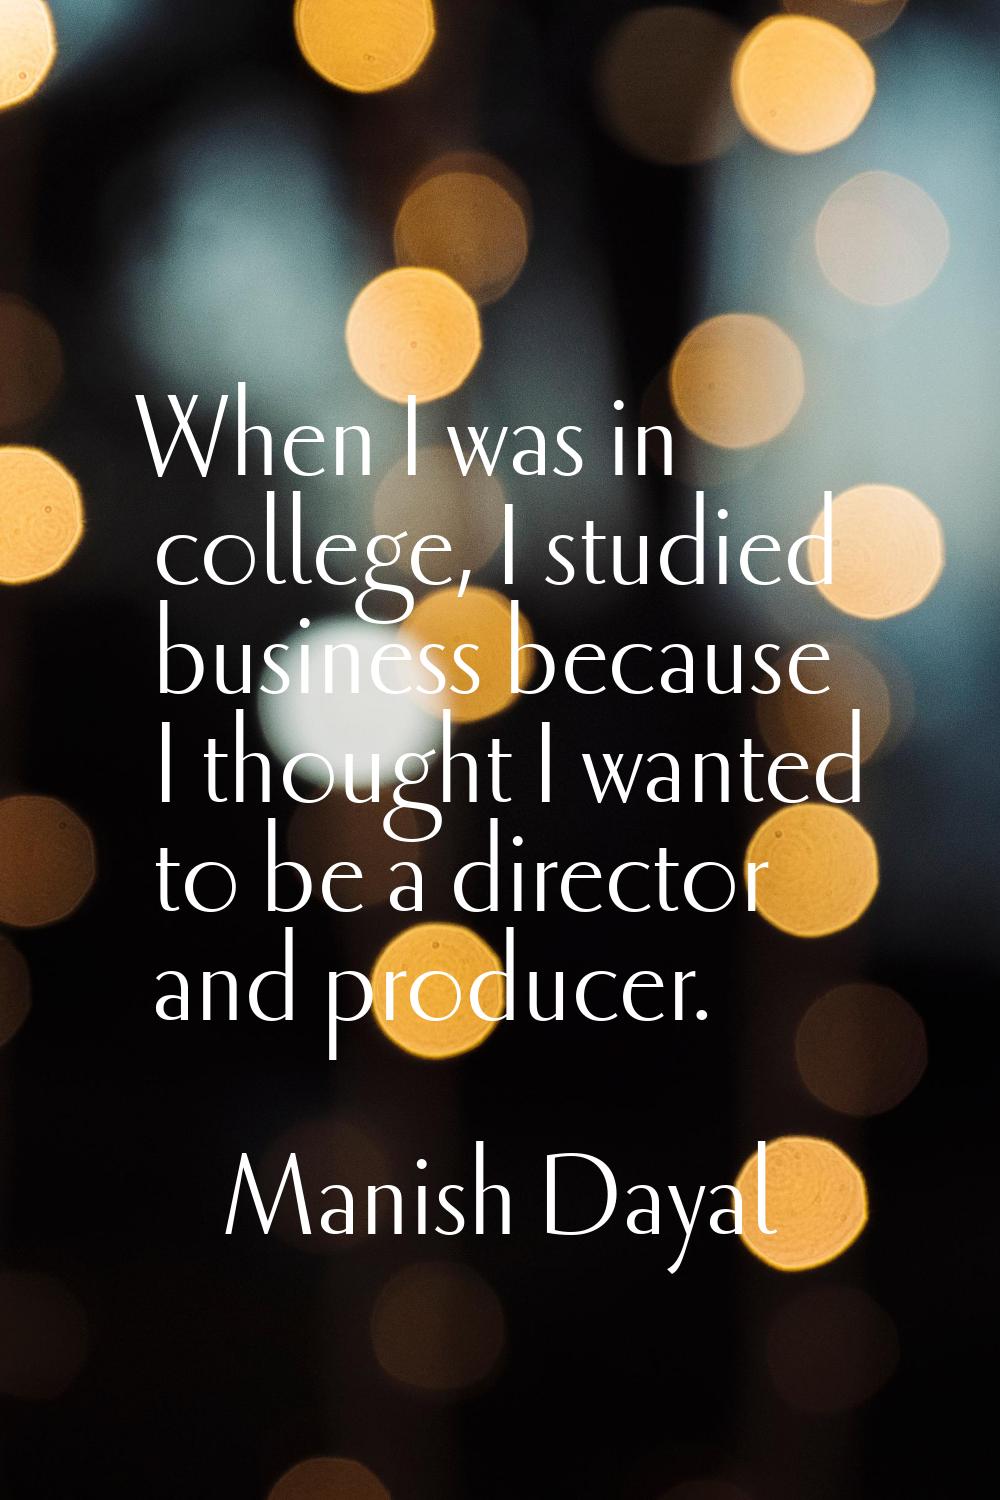 When I was in college, I studied business because I thought I wanted to be a director and producer.